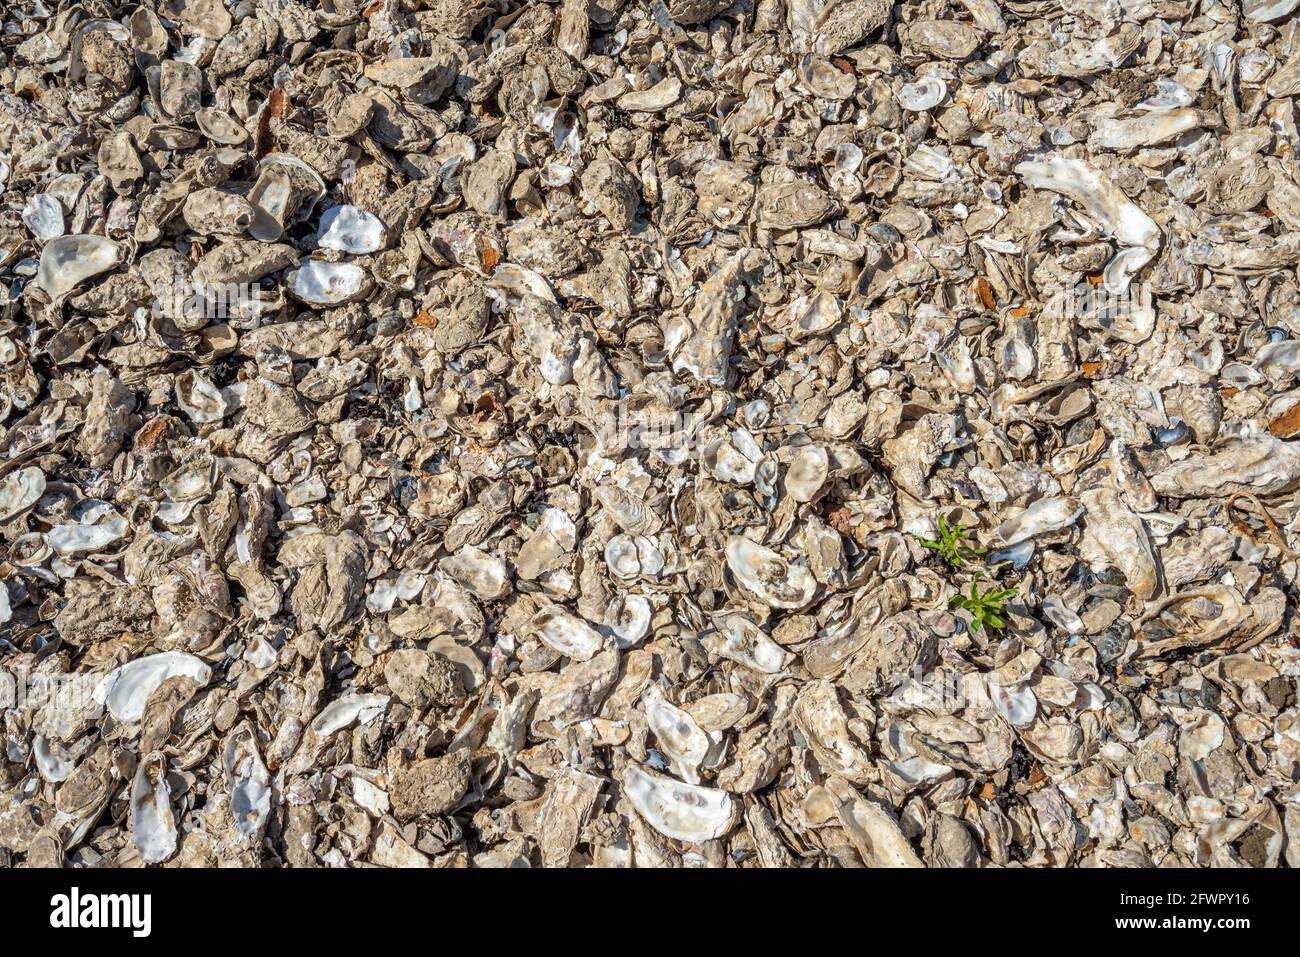 La Rochelle, Charente Maritime, France empty oyster shells from oyster farming on west Atlantic coast Stock Photo